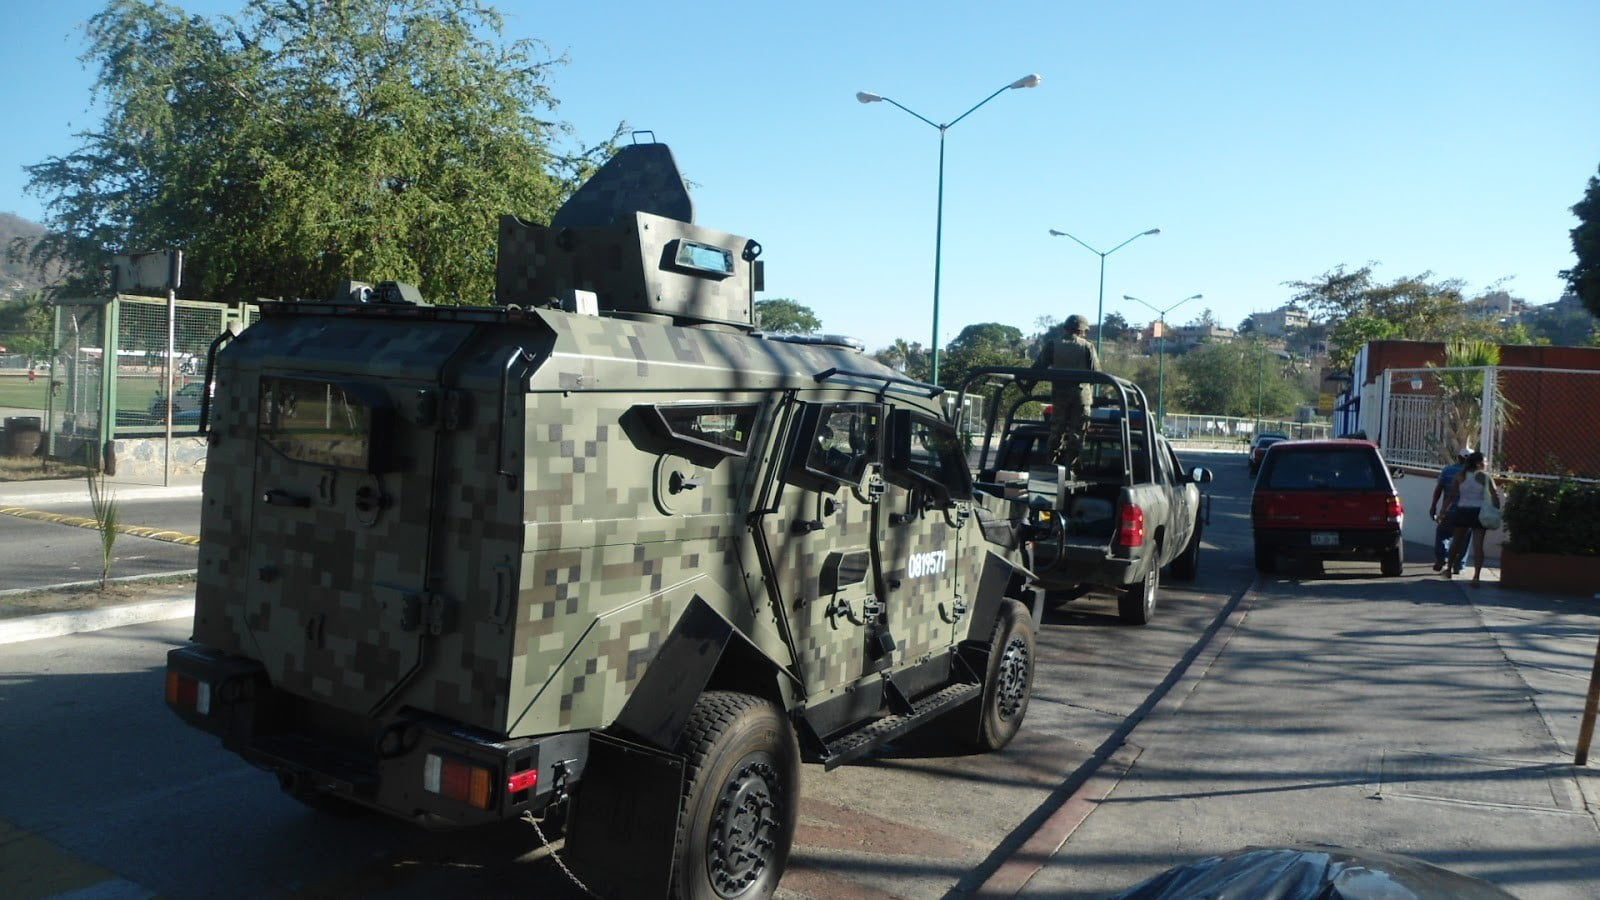 green, gray and black digital camouflage truck, Mexico, Army Mexican, Ejercito Mexicano, military